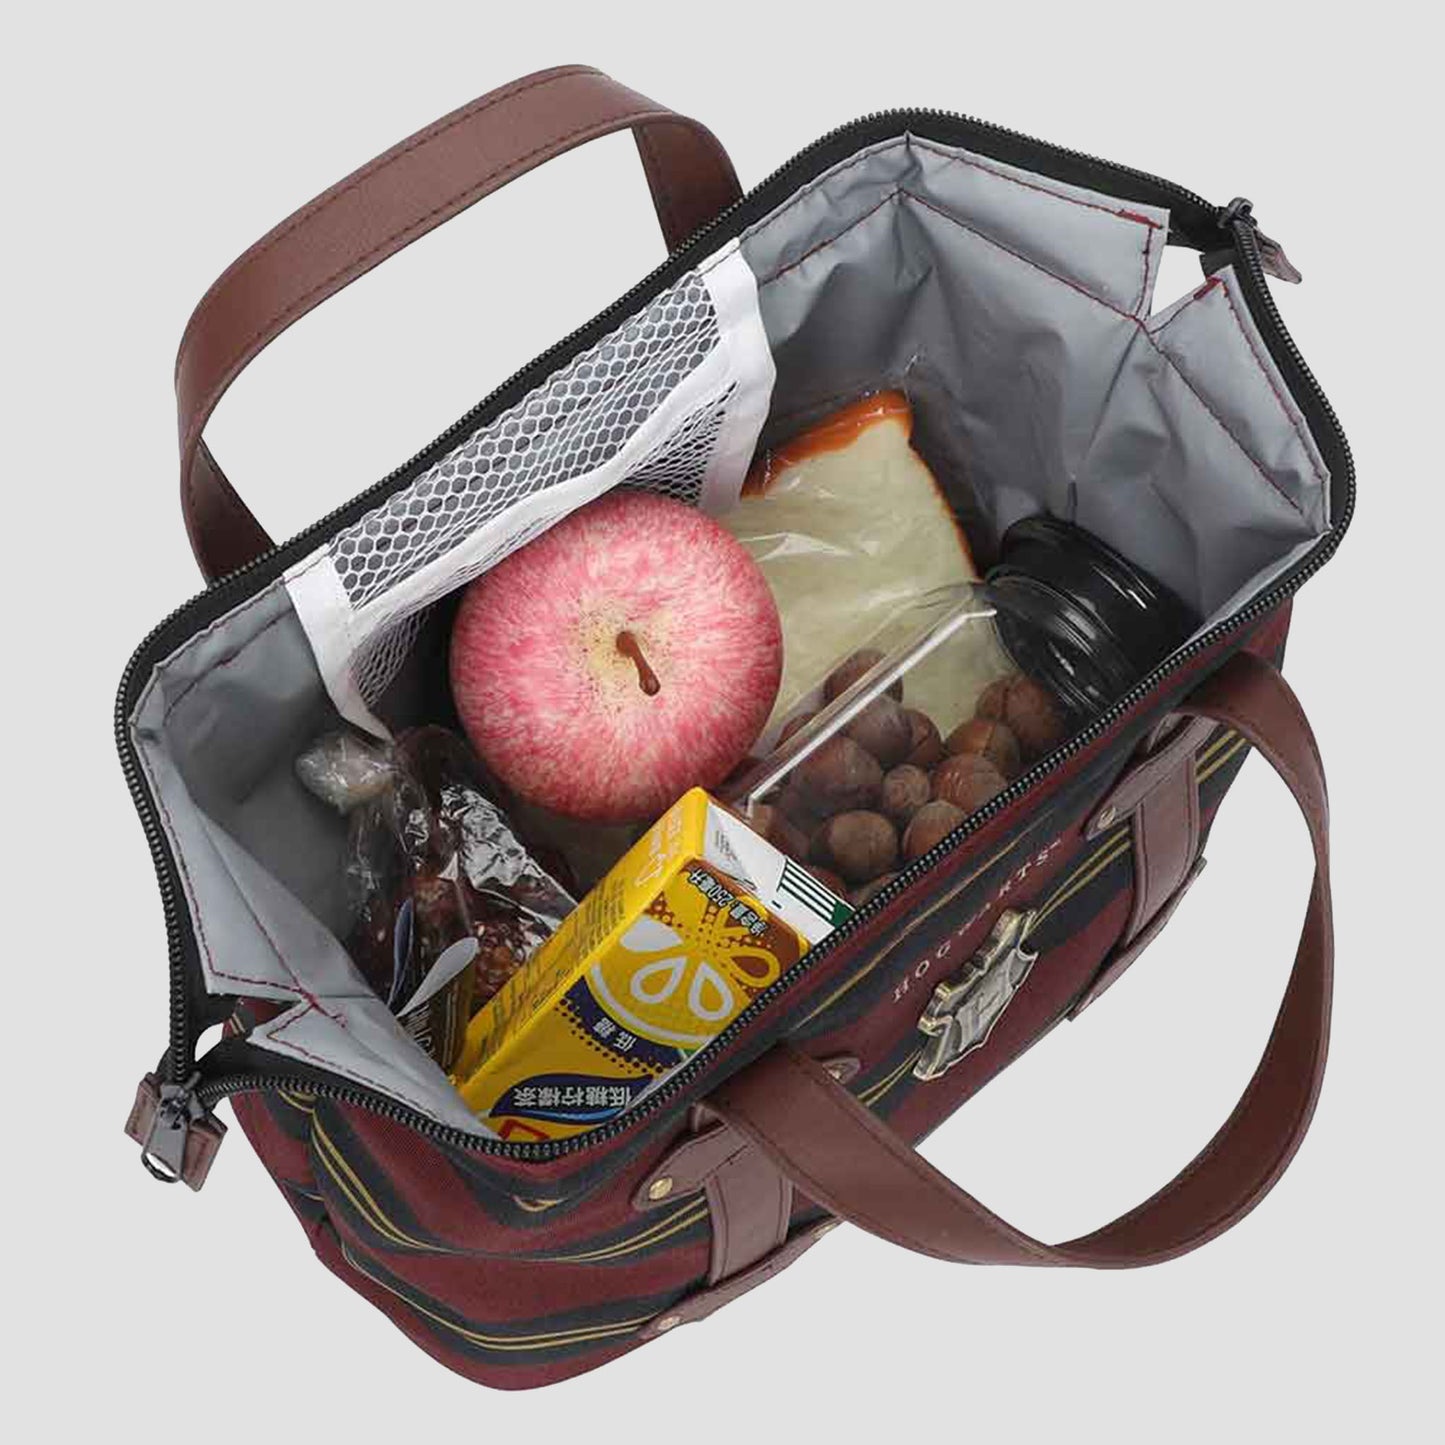 Load image into Gallery viewer, Hogwarts Trunk (Harry Potter) Insulated Lunch Tote Bag
